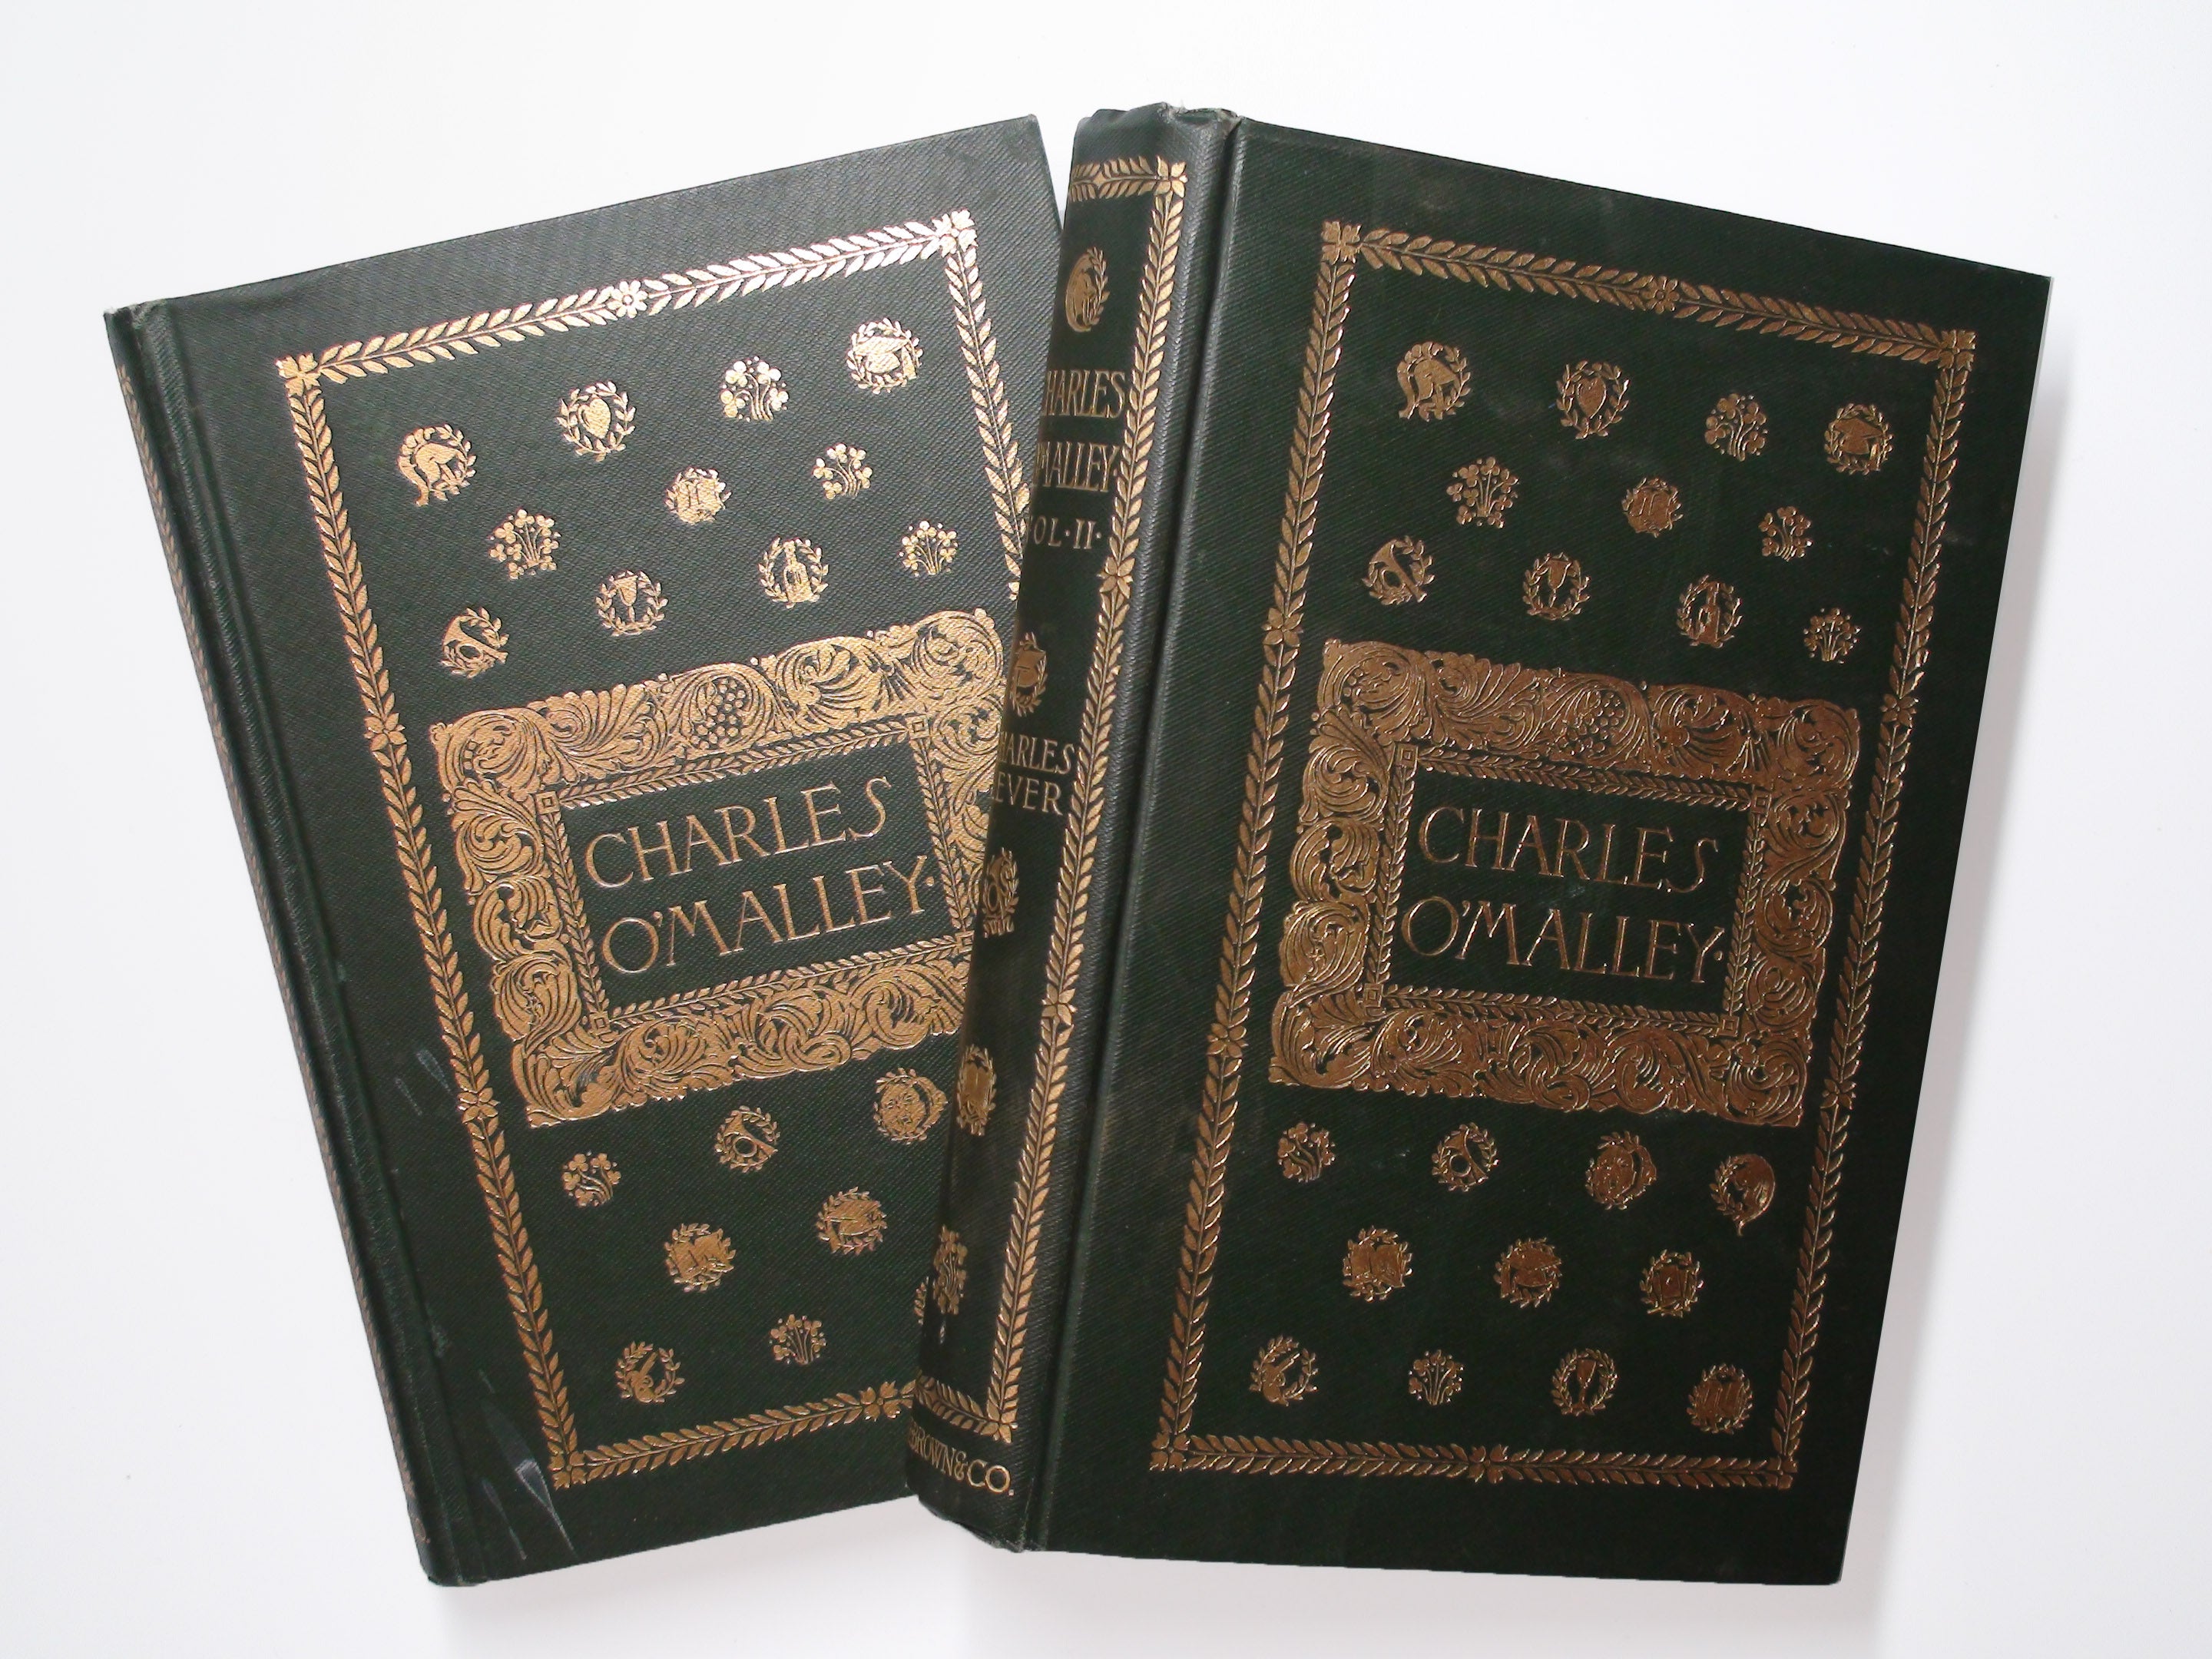 Charles O'Malley, Irish Dragoon, In 2 Vols, by Charles Lever, Illustrated, 1904